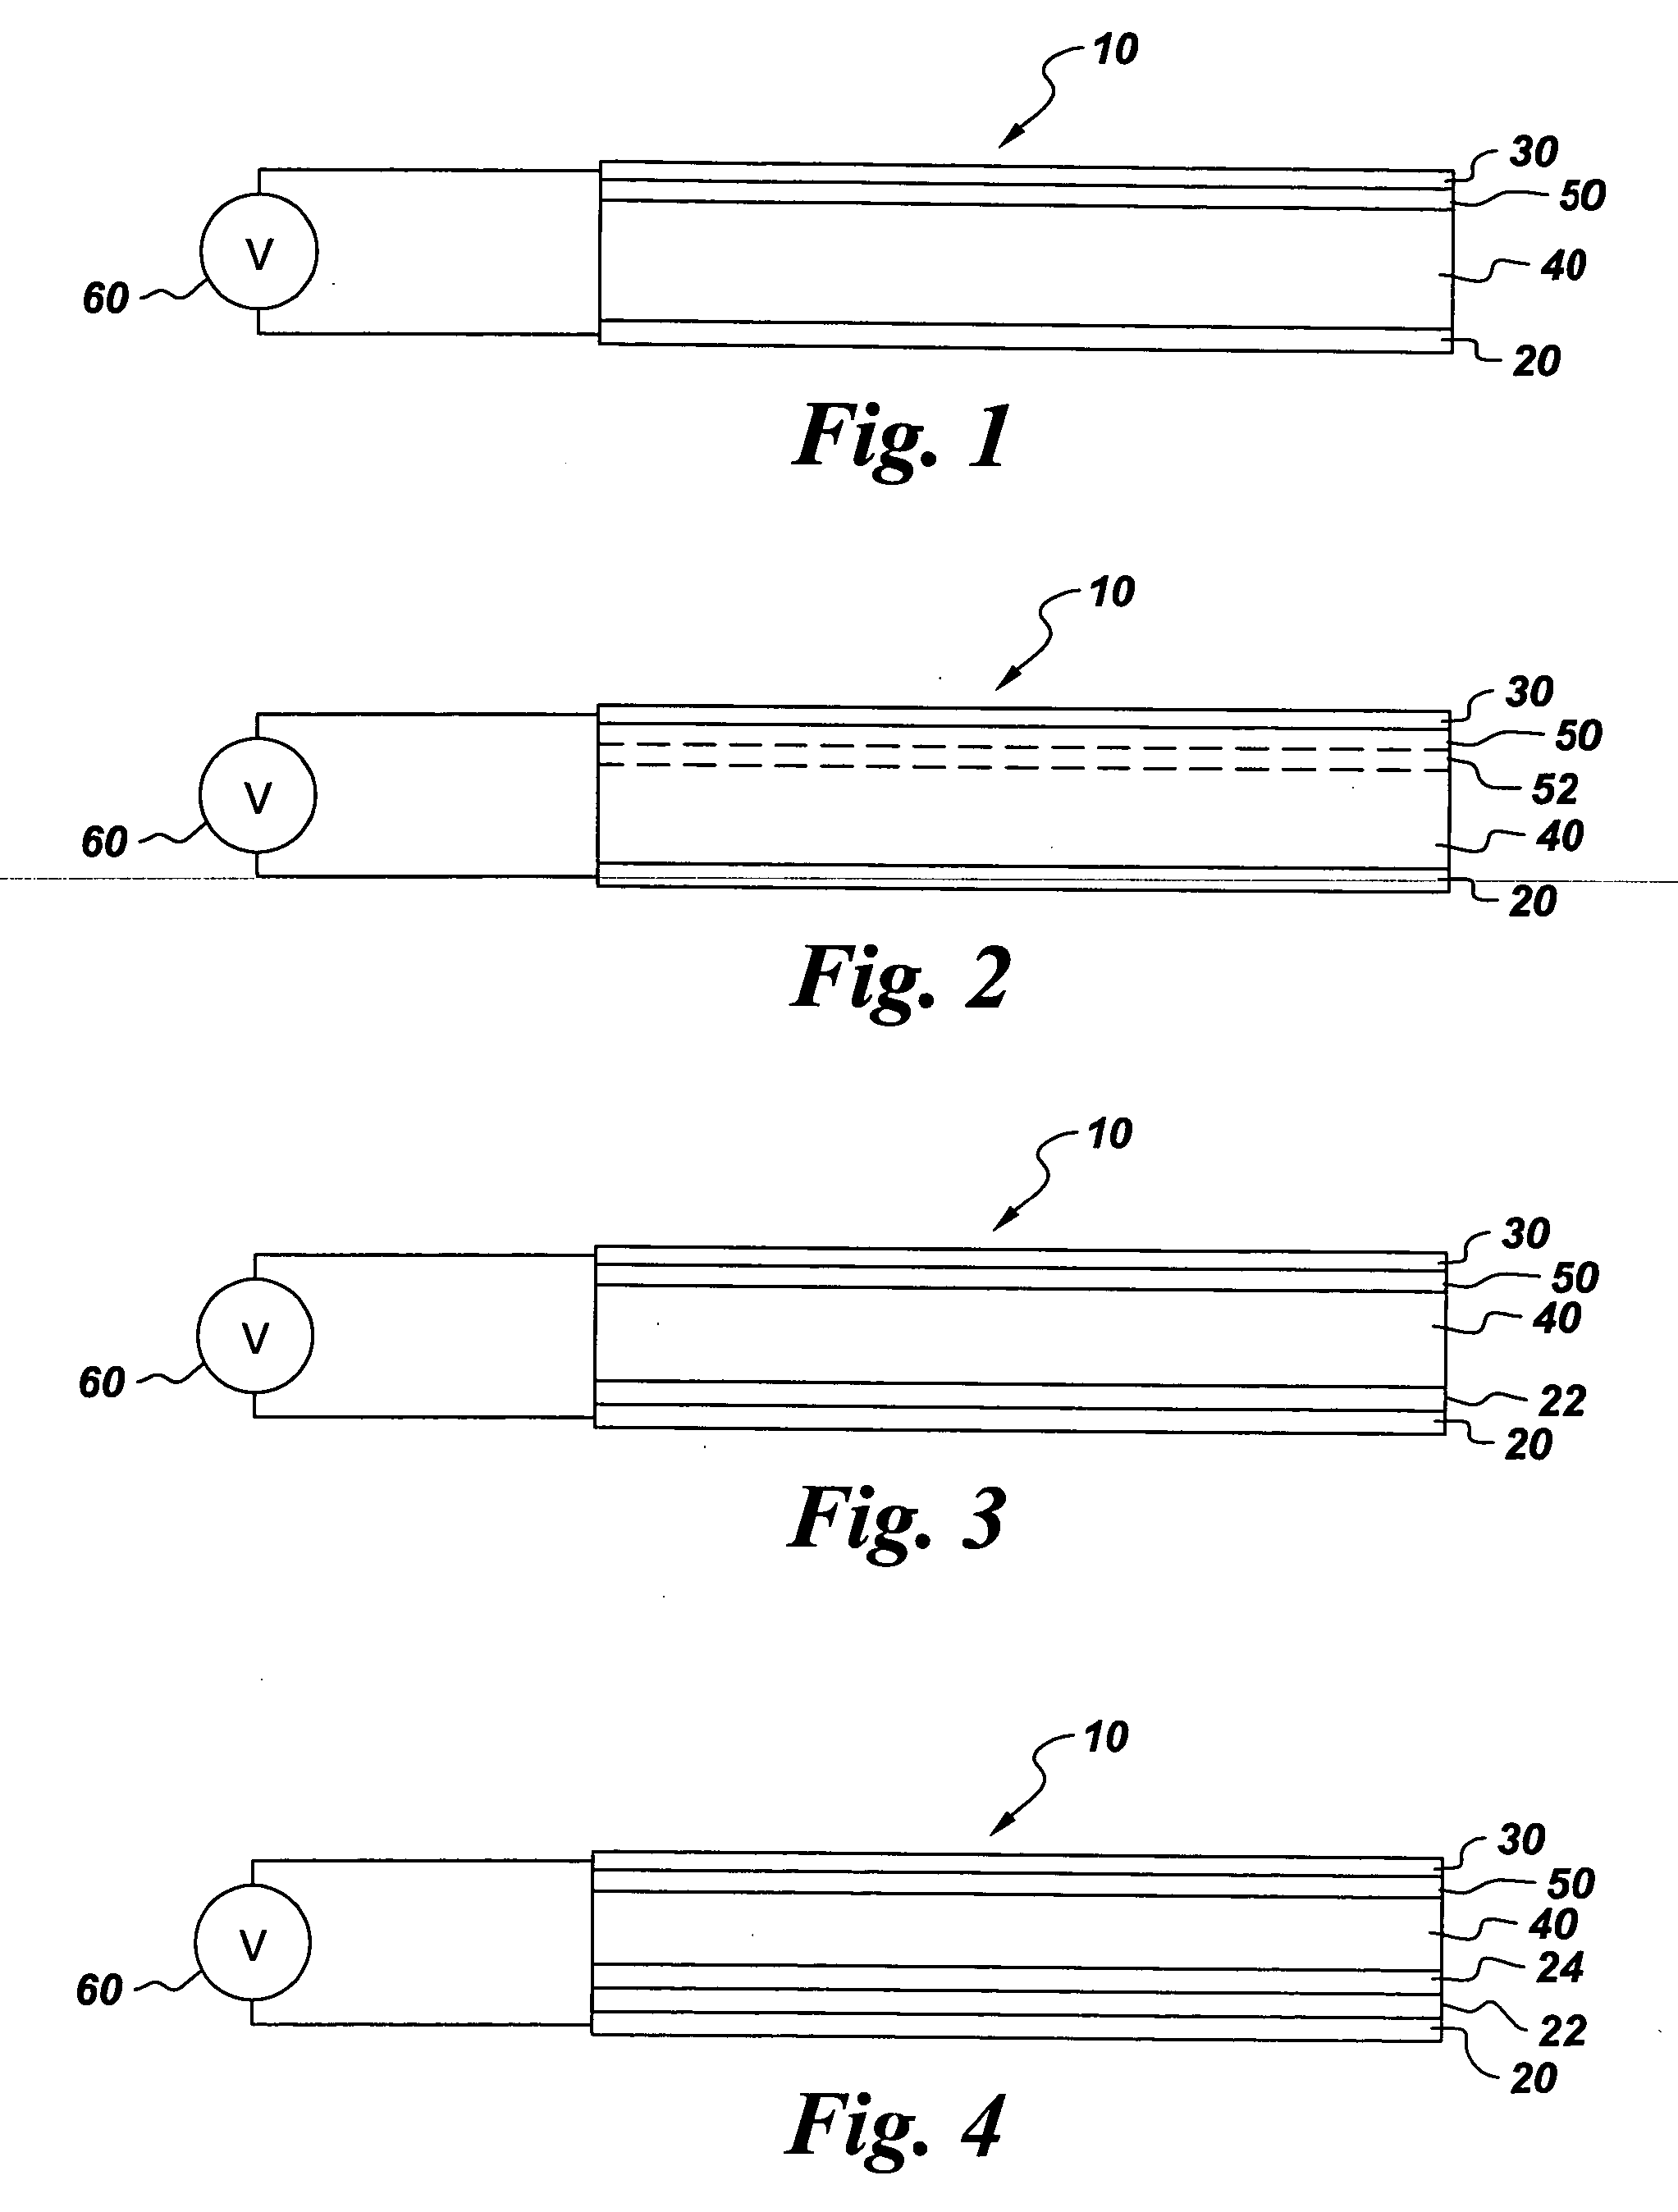 Charge transfer-promoting materials and electronic devices incorporating same